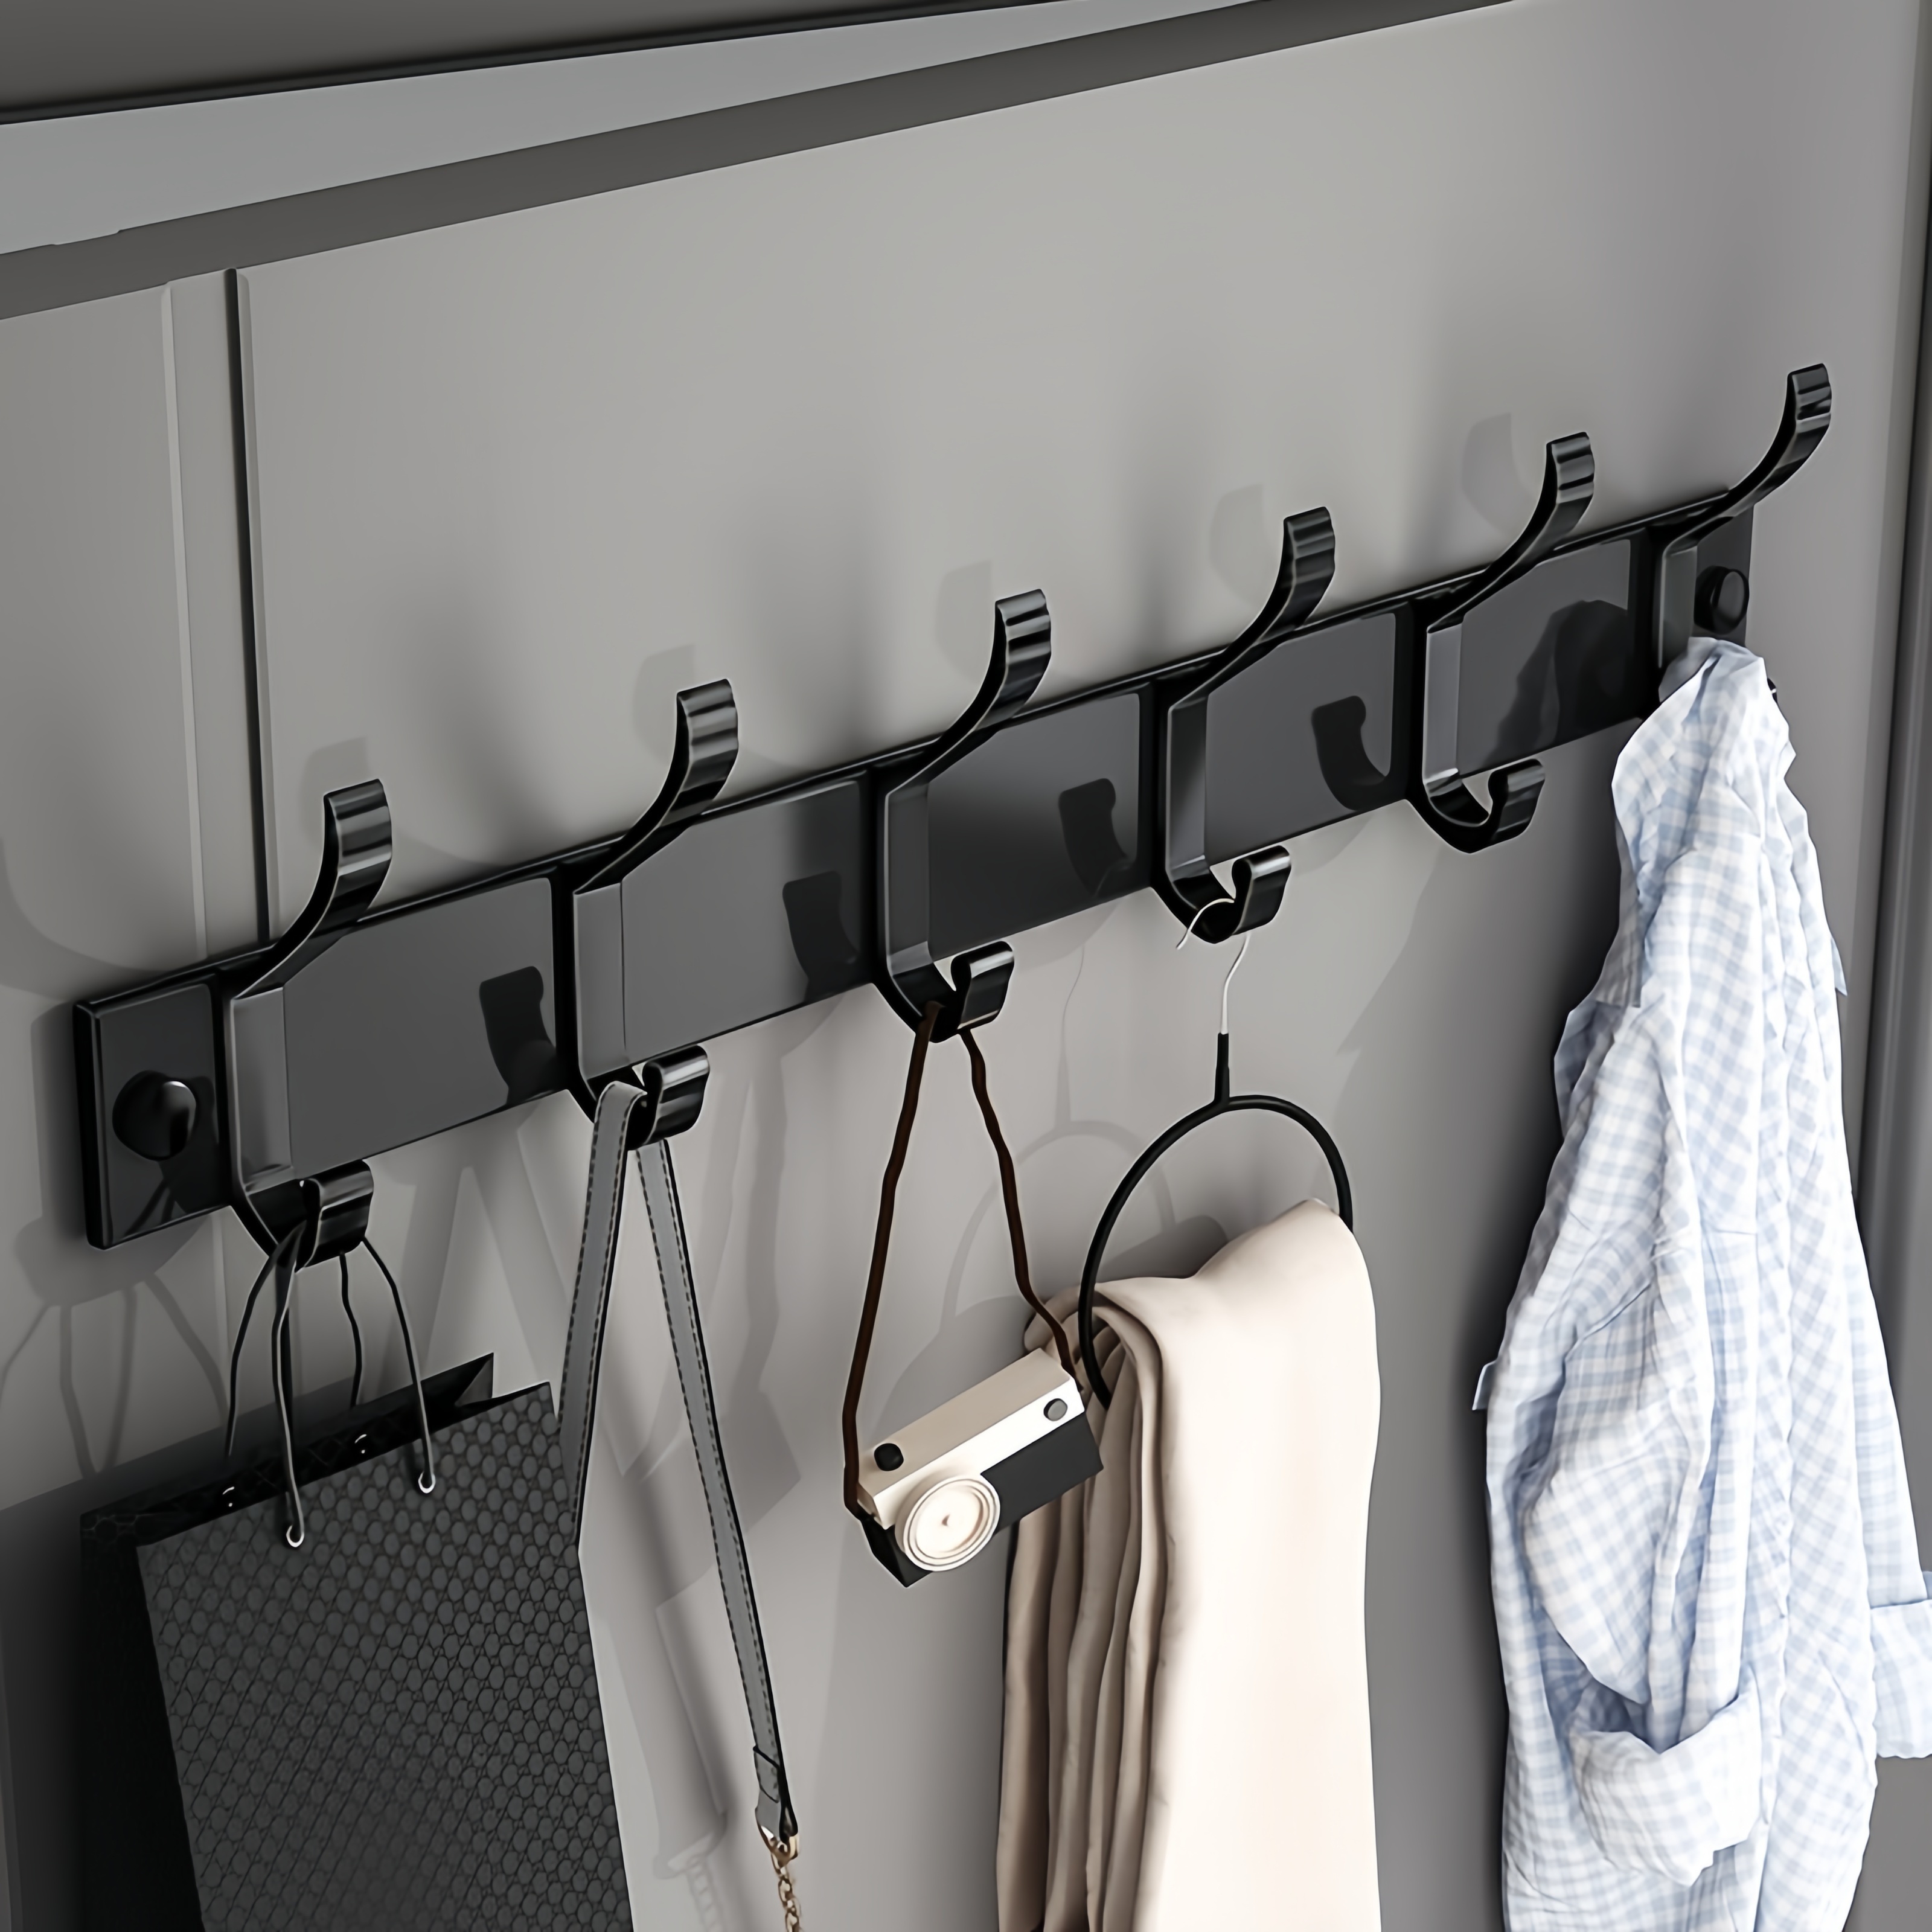  CHILDWEET Metal Coat Hooks Heavy Duty Clothes Mount Clothing  Rack Hat Wall Hanger Towel Holder Wall Mounted Coat Hooks Heavy Duty  Hangers Punch Wall Hanger Clothes Hook Round Hook : Home